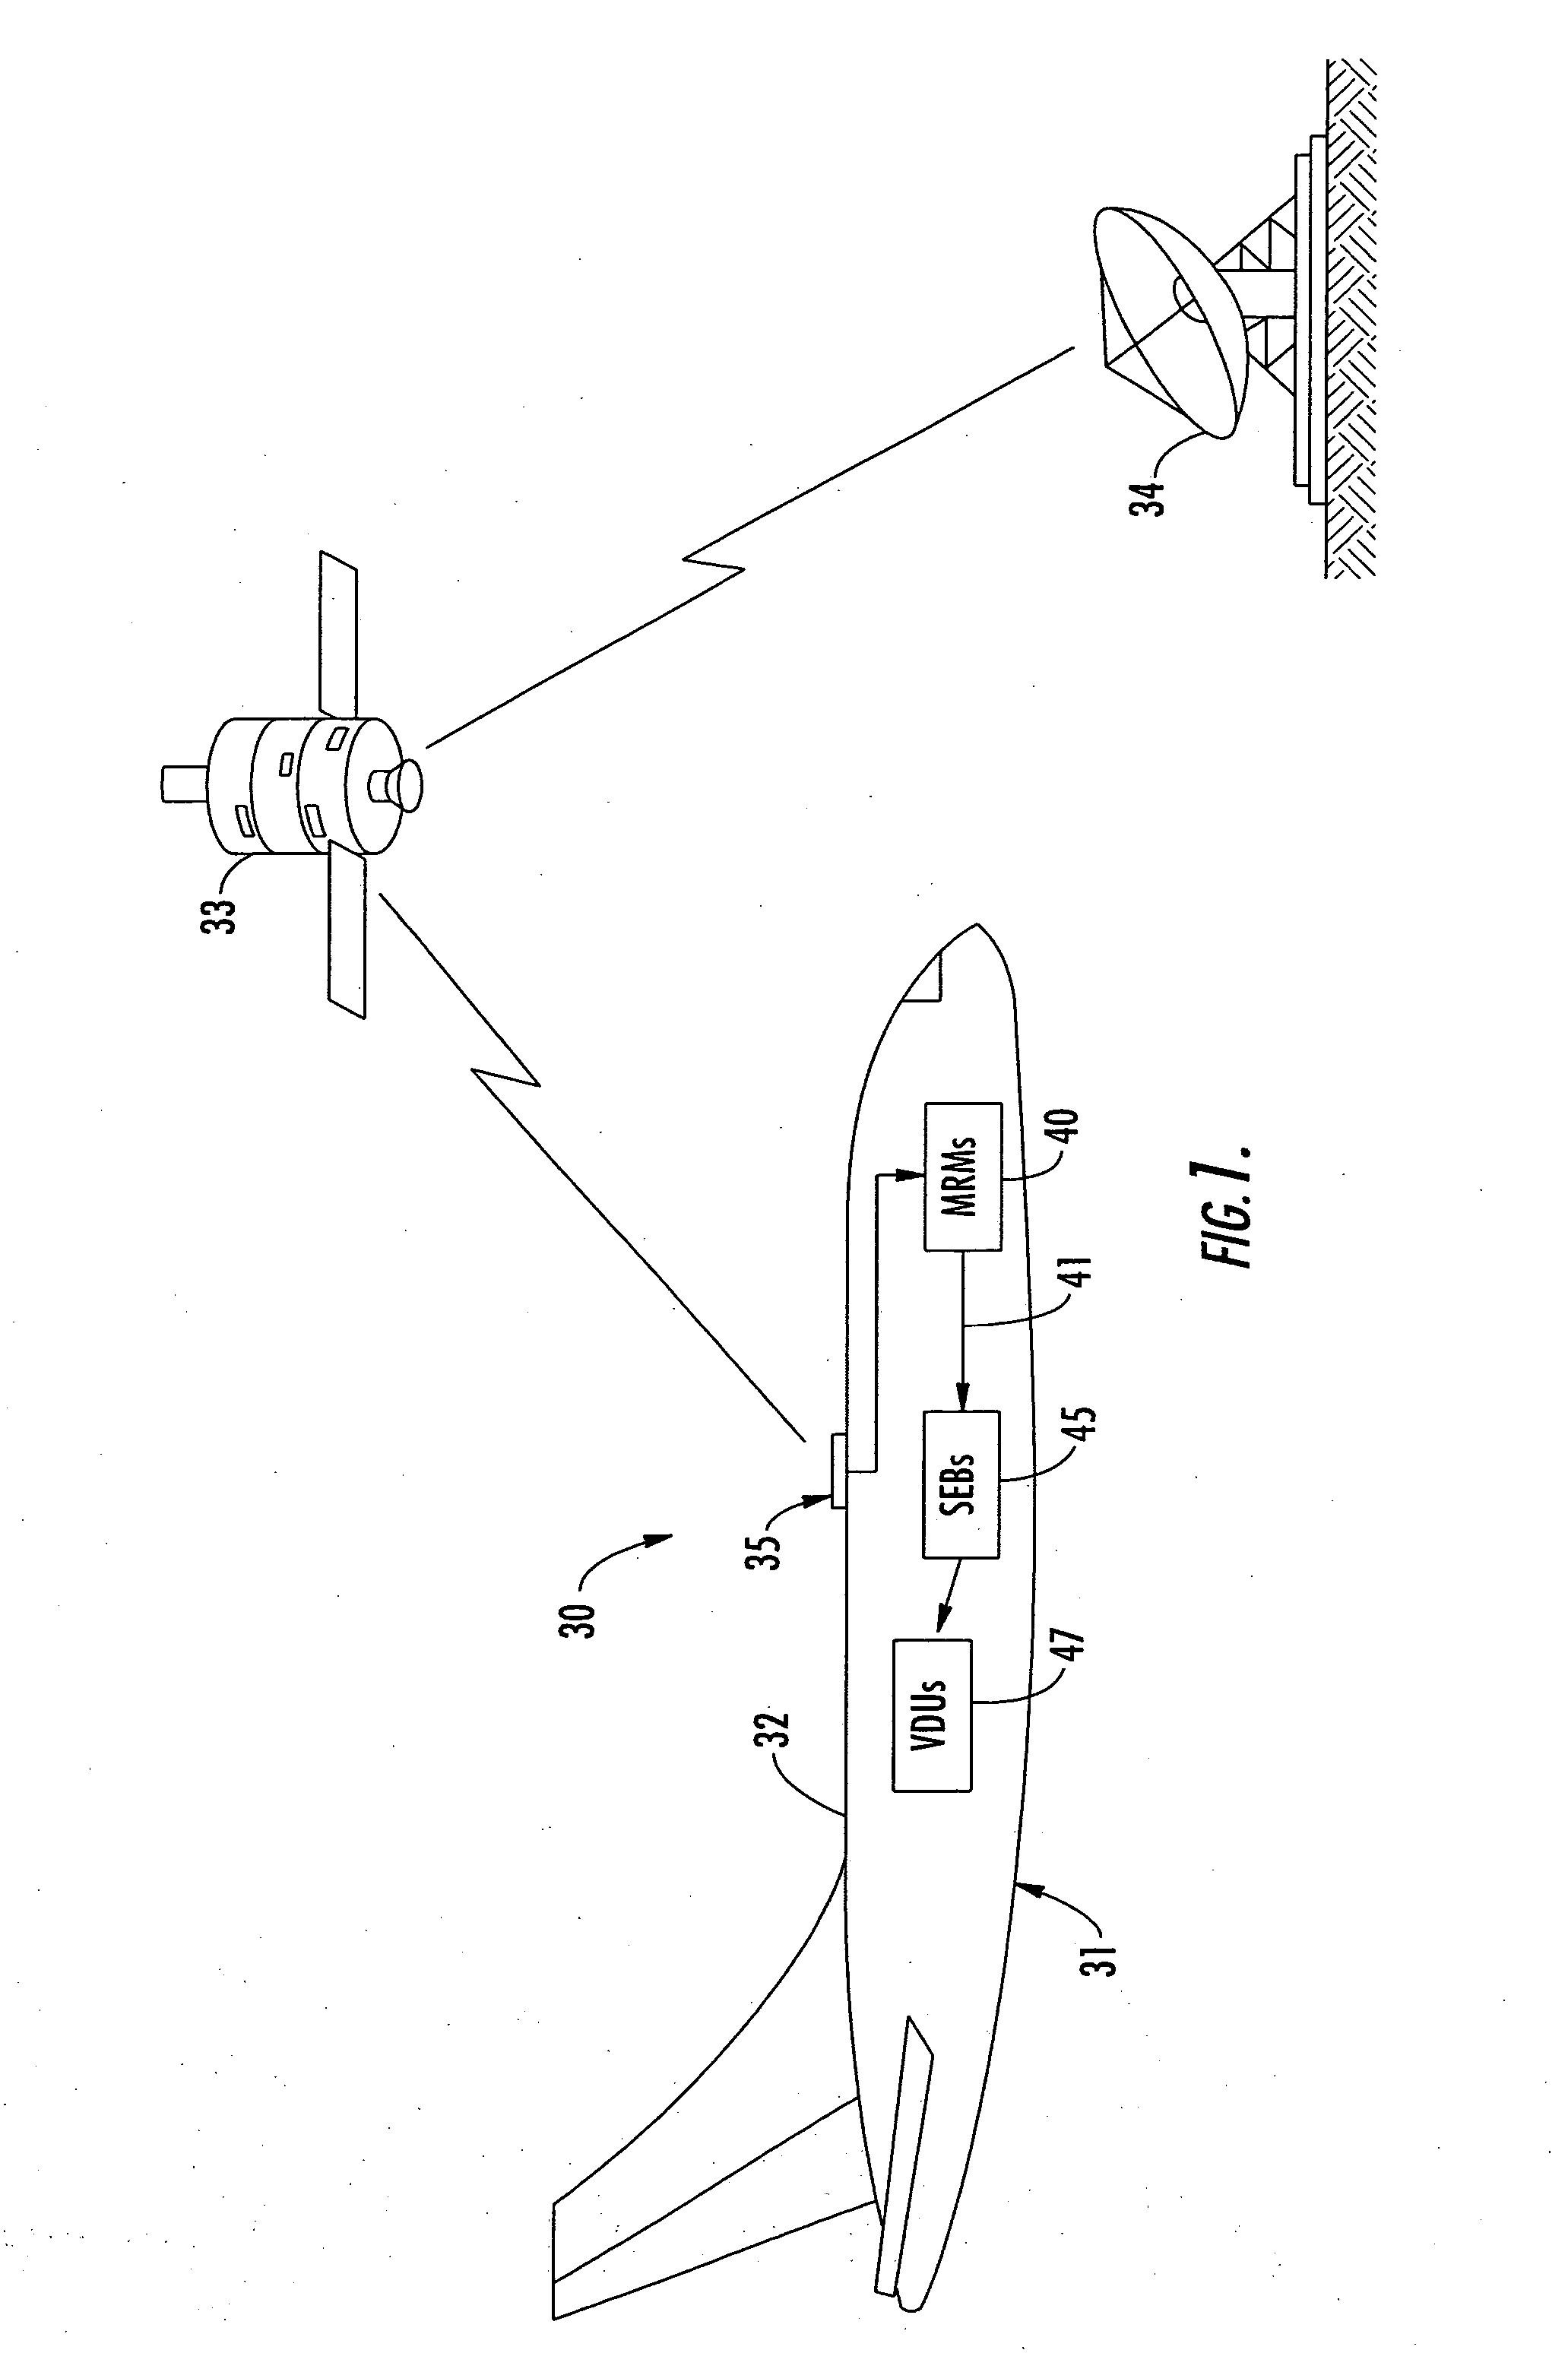 Aircraft in-flight entertainment system including digital radio service and associated methods